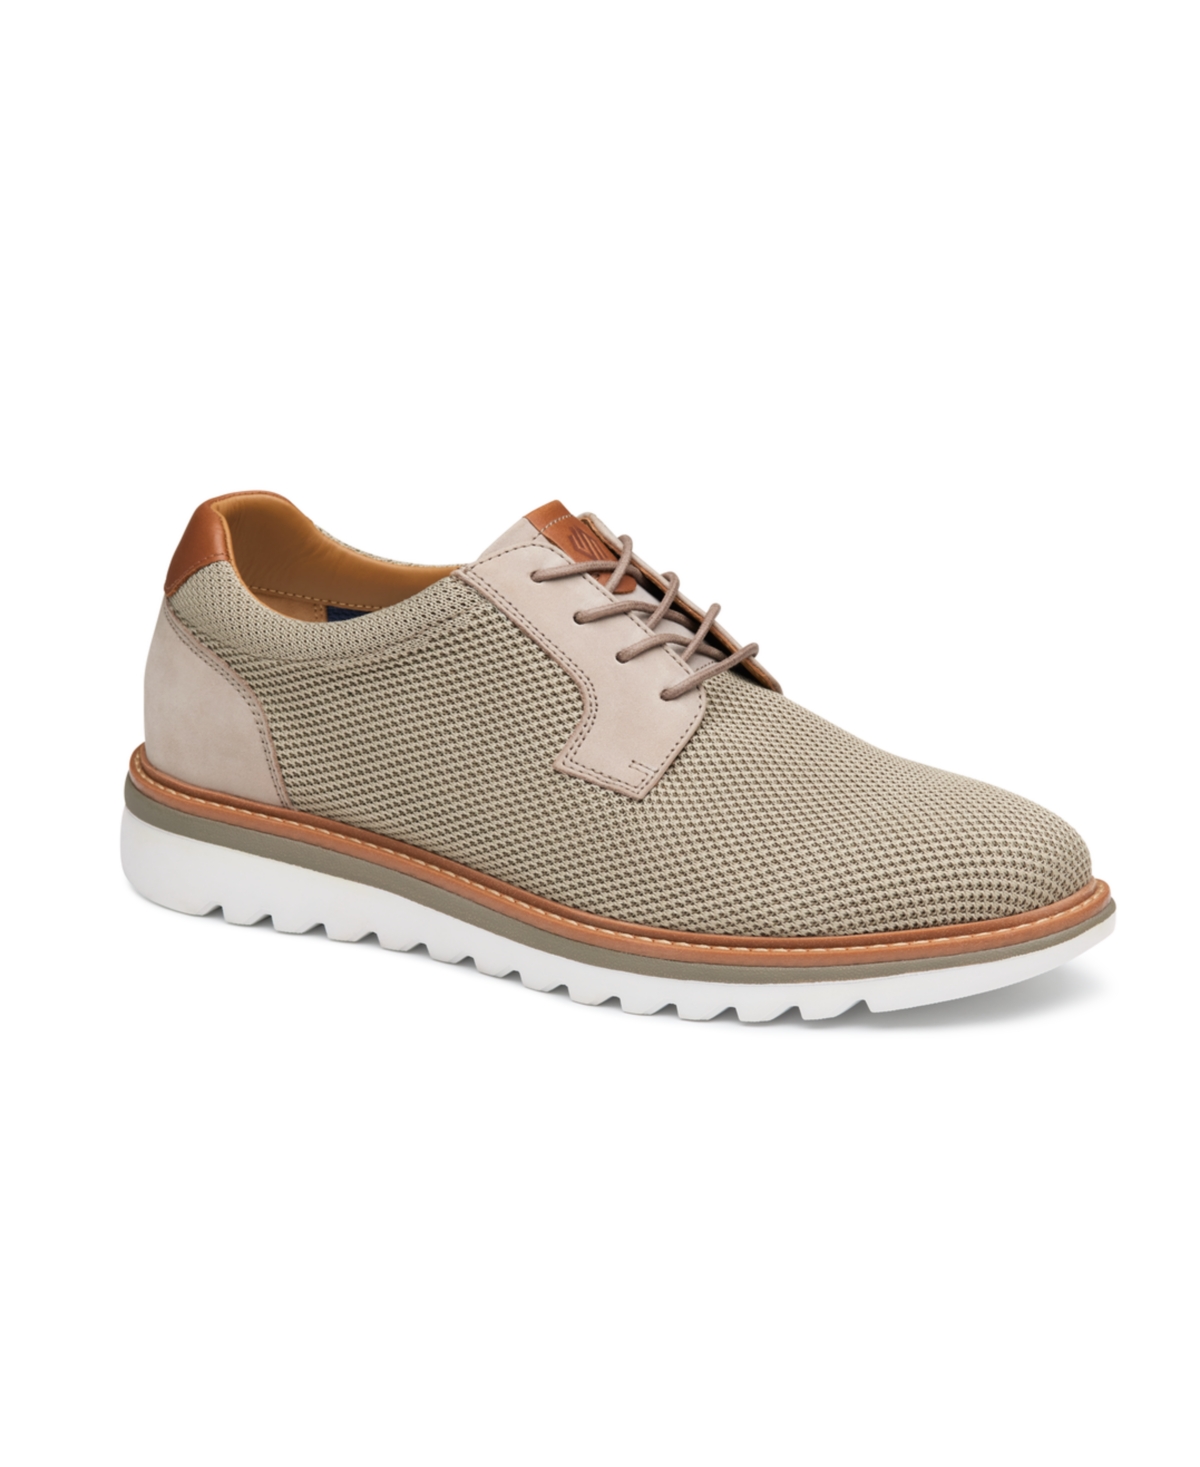 Men's Braydon Knit Plain Toe Casual Lace Up Sneakers - Taupe